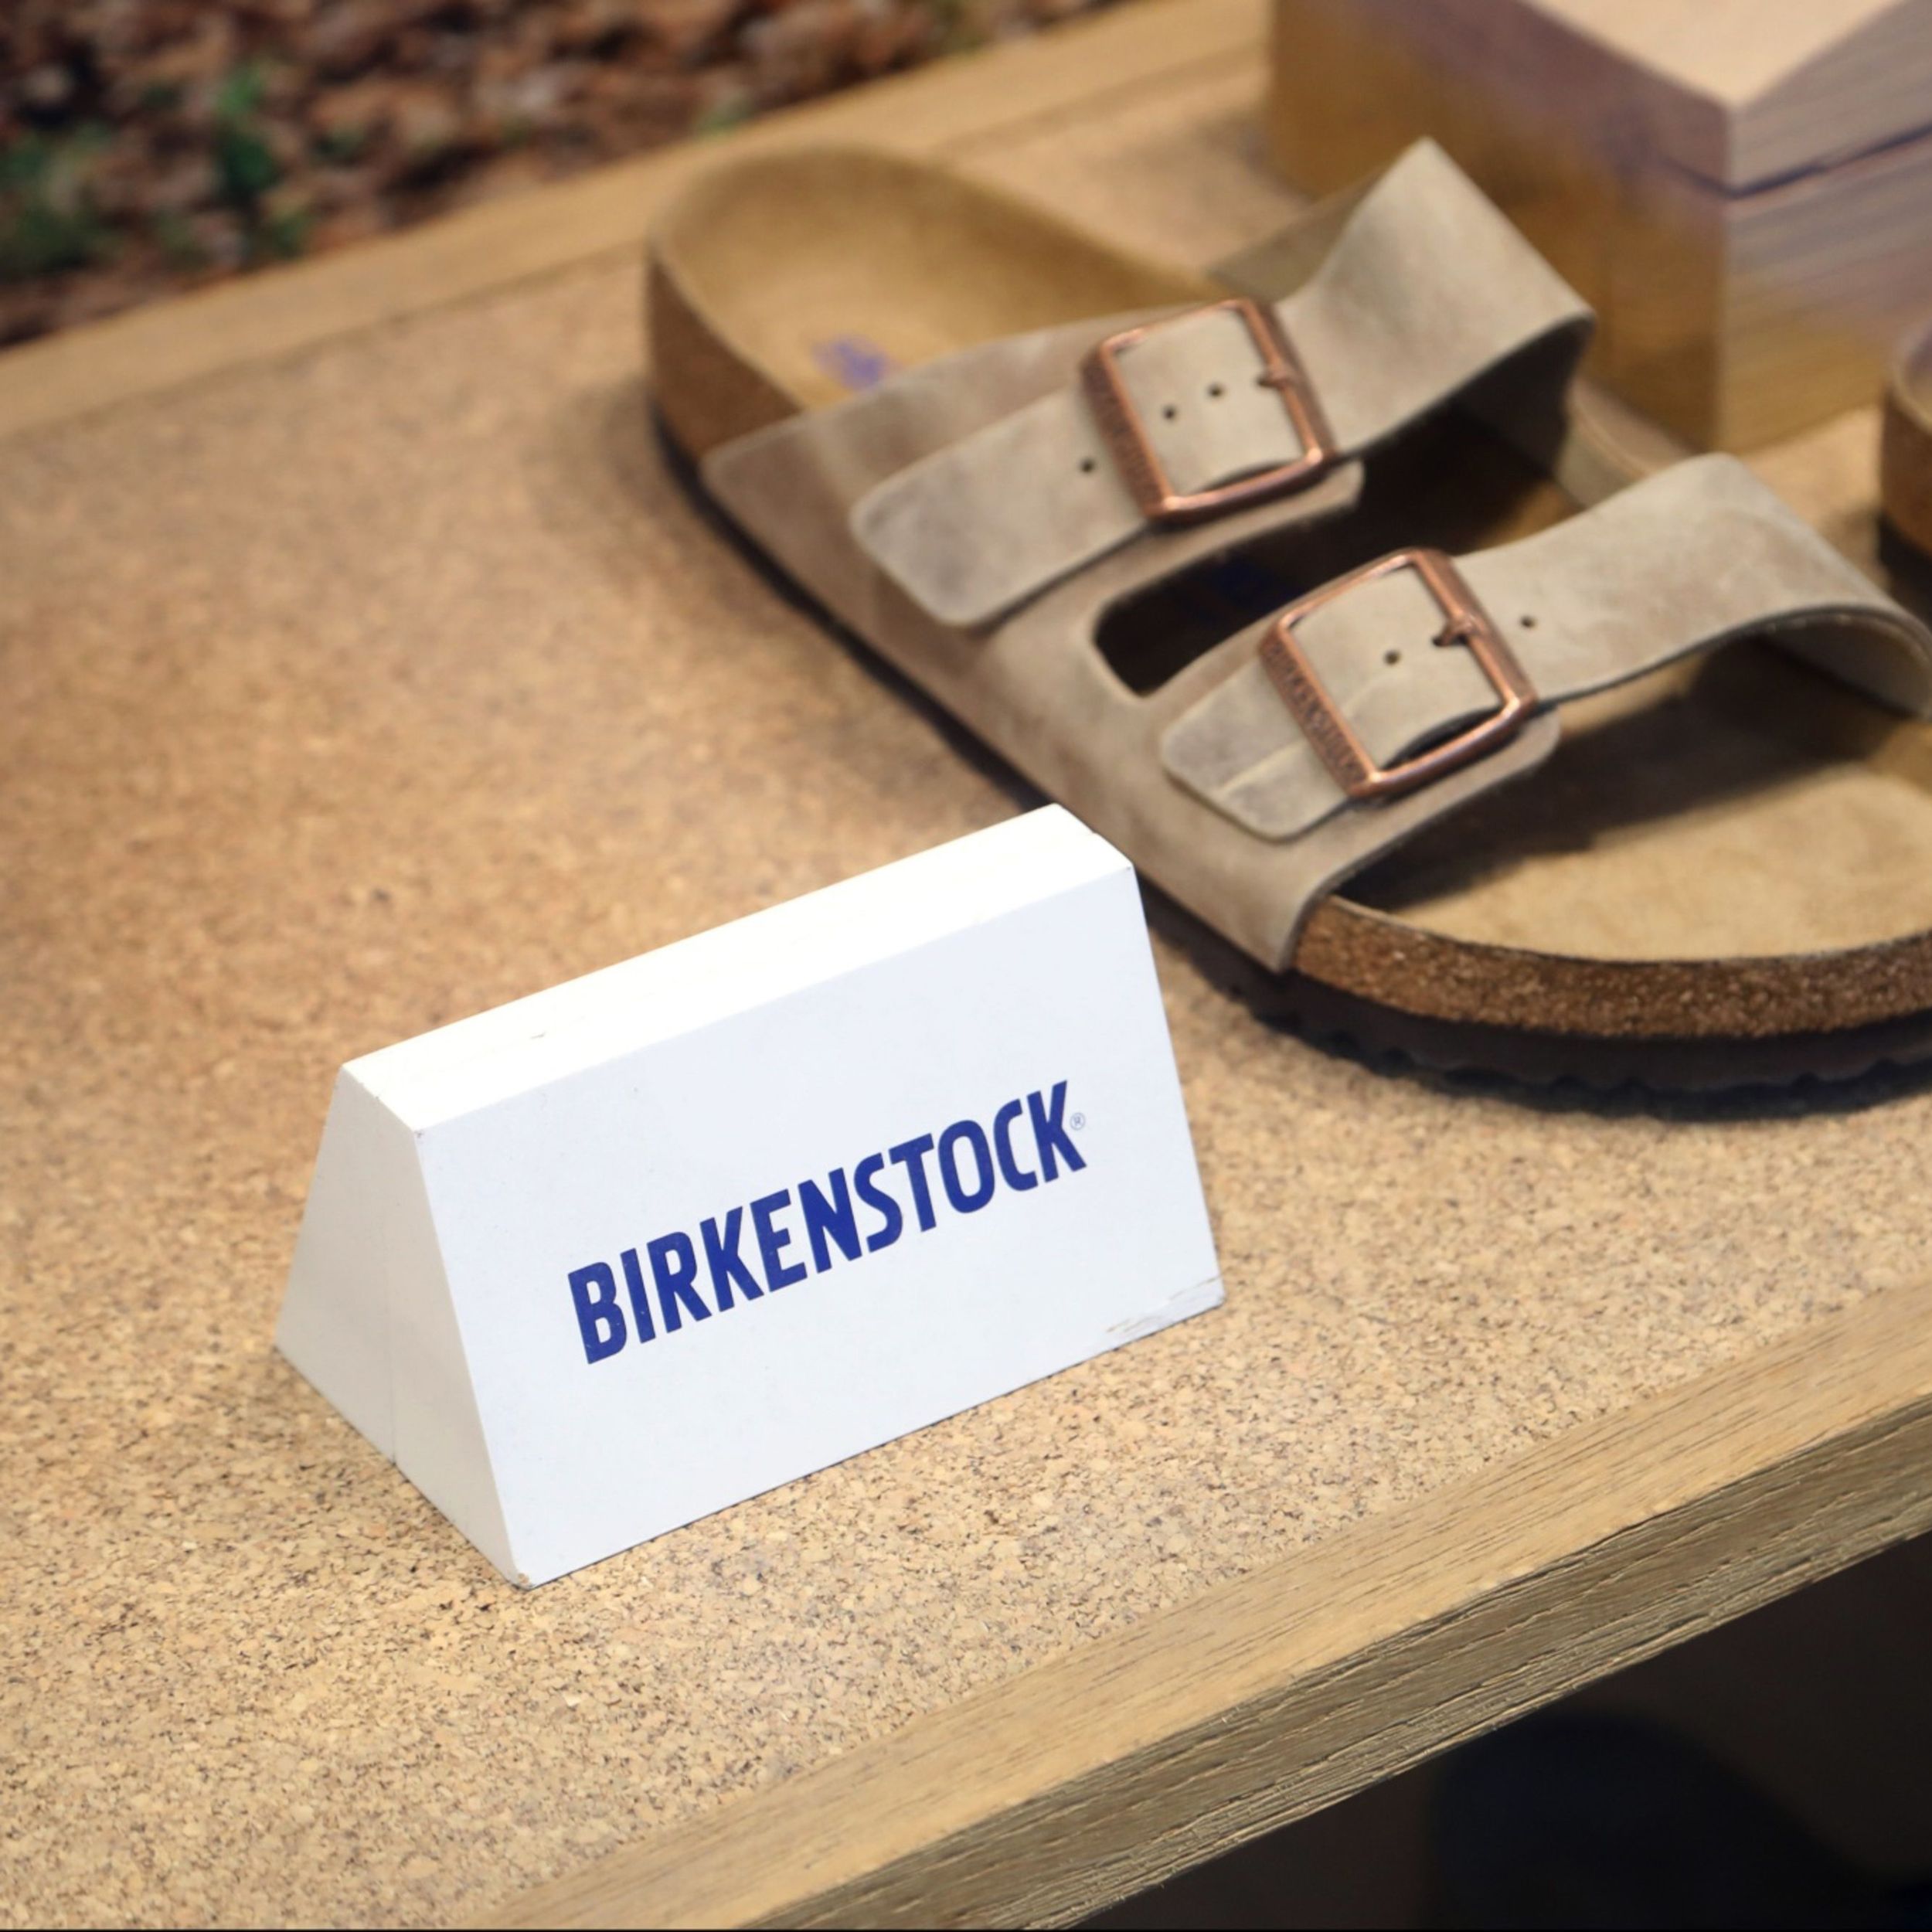 A Birkenstock x LVMH/Catterton Acquisition Is Here